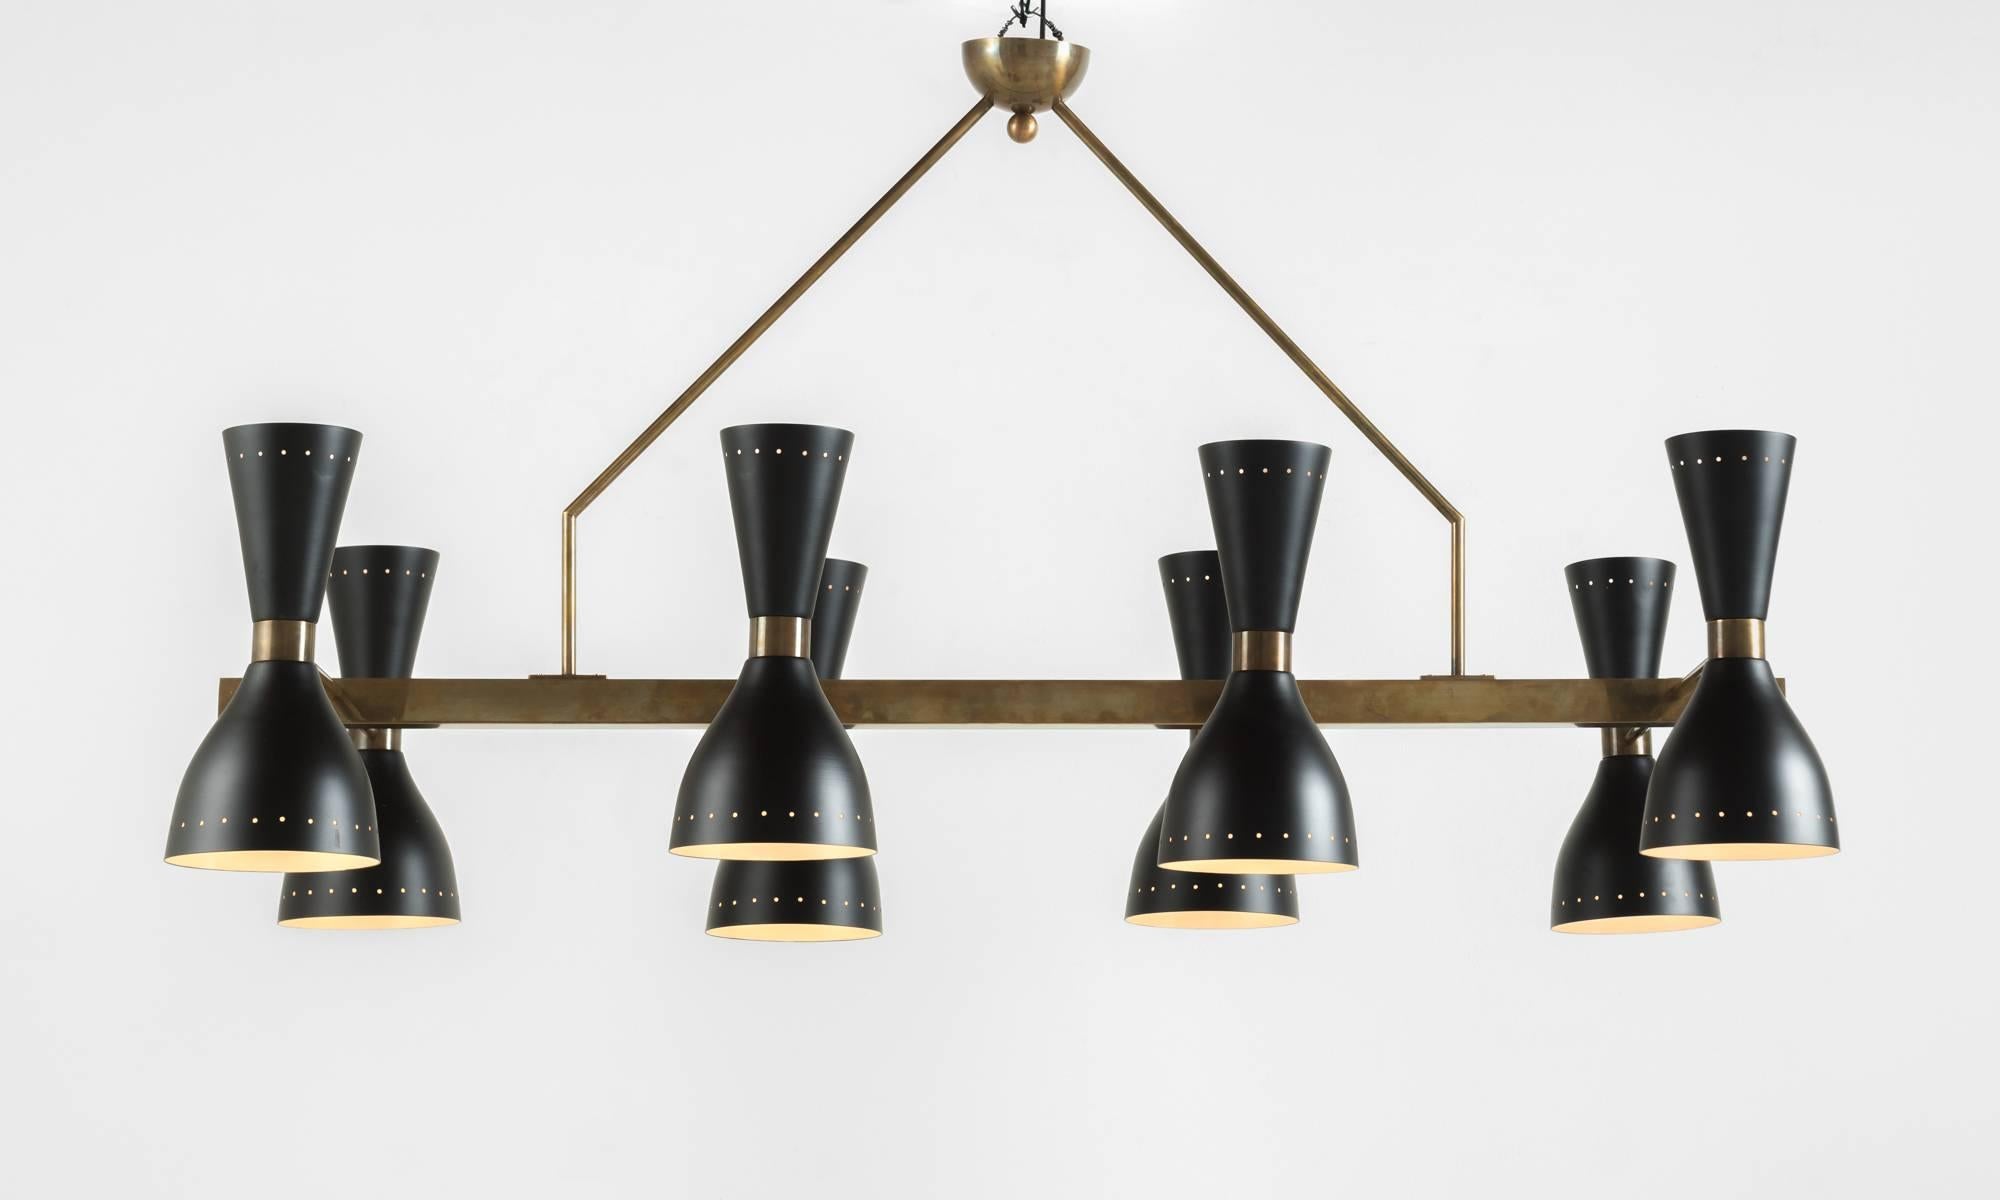 Black & Brass Eight Shade Chandelier  
Made in Italy
Rectangular form with brass hardware and eight black painted metal shades.
55